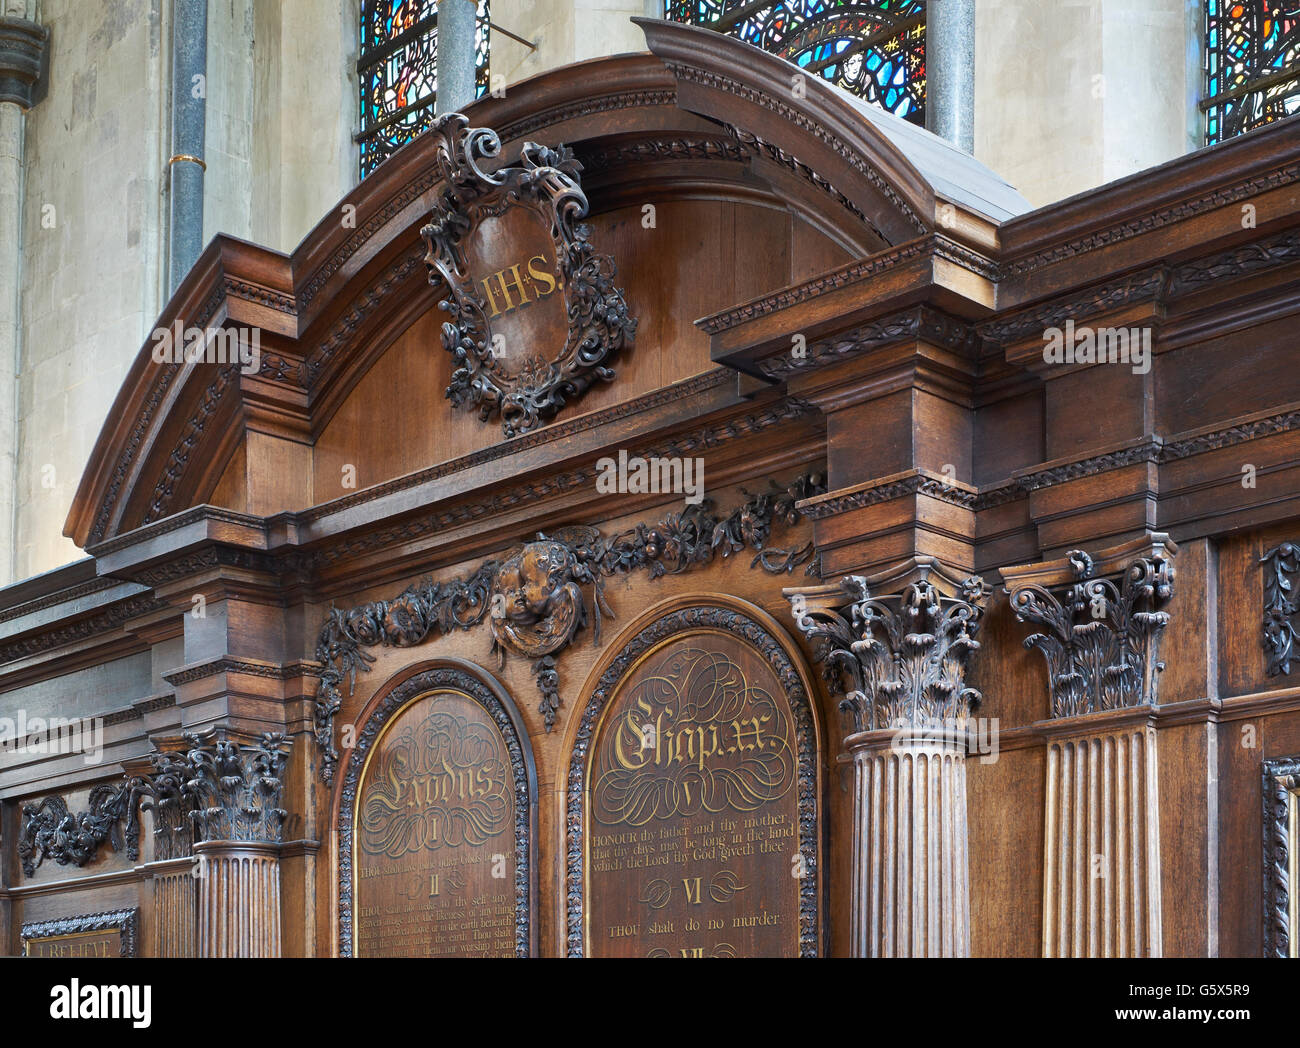 Temple Church in the City of London; the Reredos carved by William Emmett in the 1680s. Stock Photo